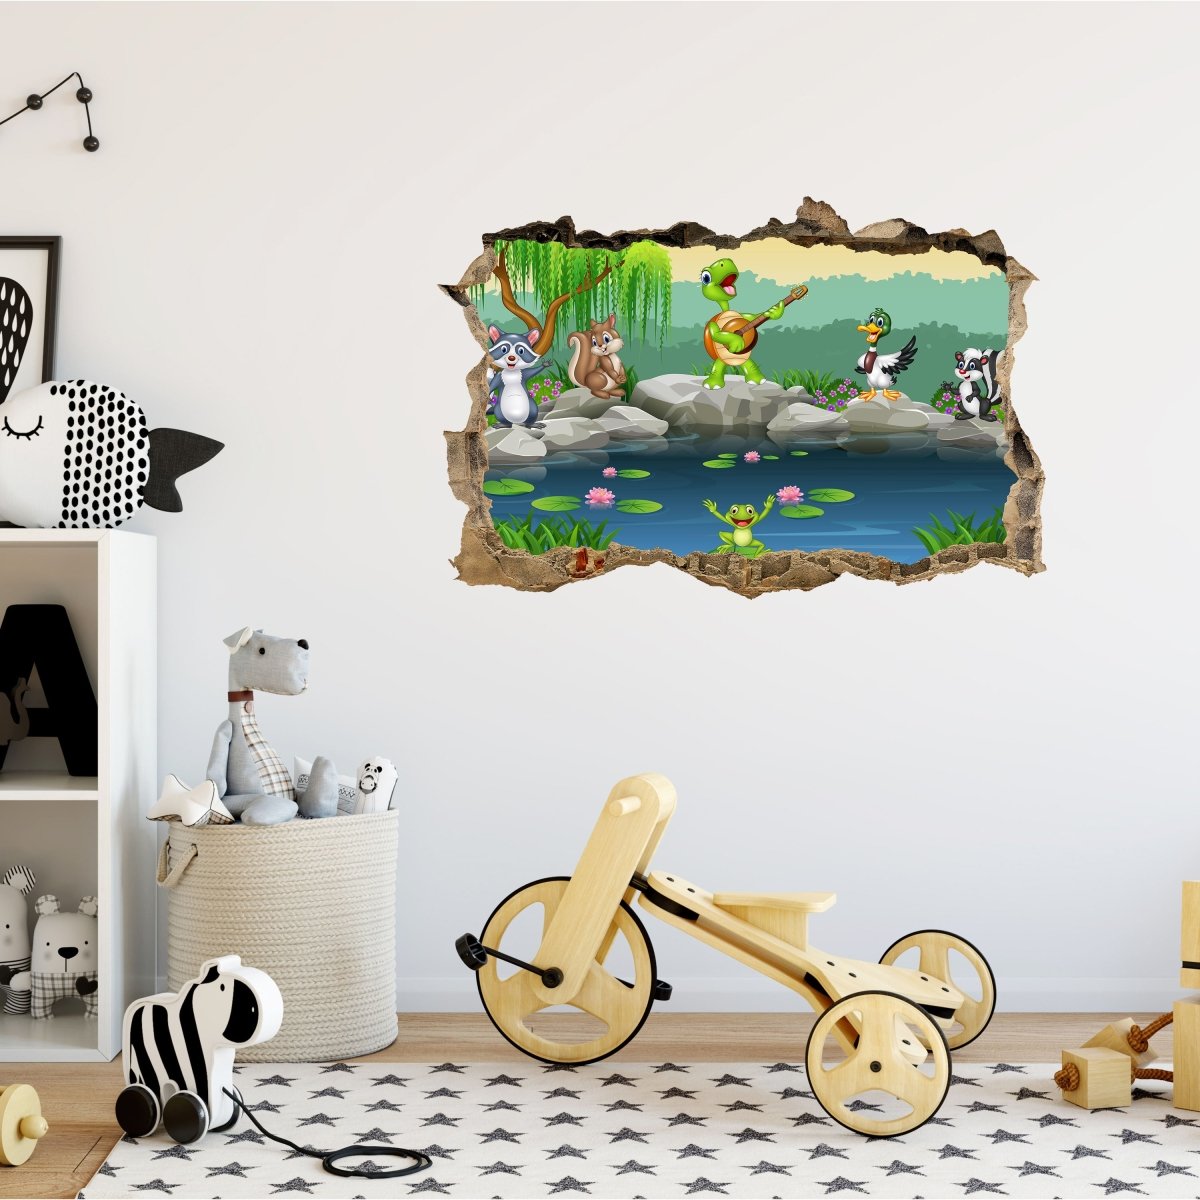 3D wall sticker animals at the pond, frog, turtle - Wall Decal M1219